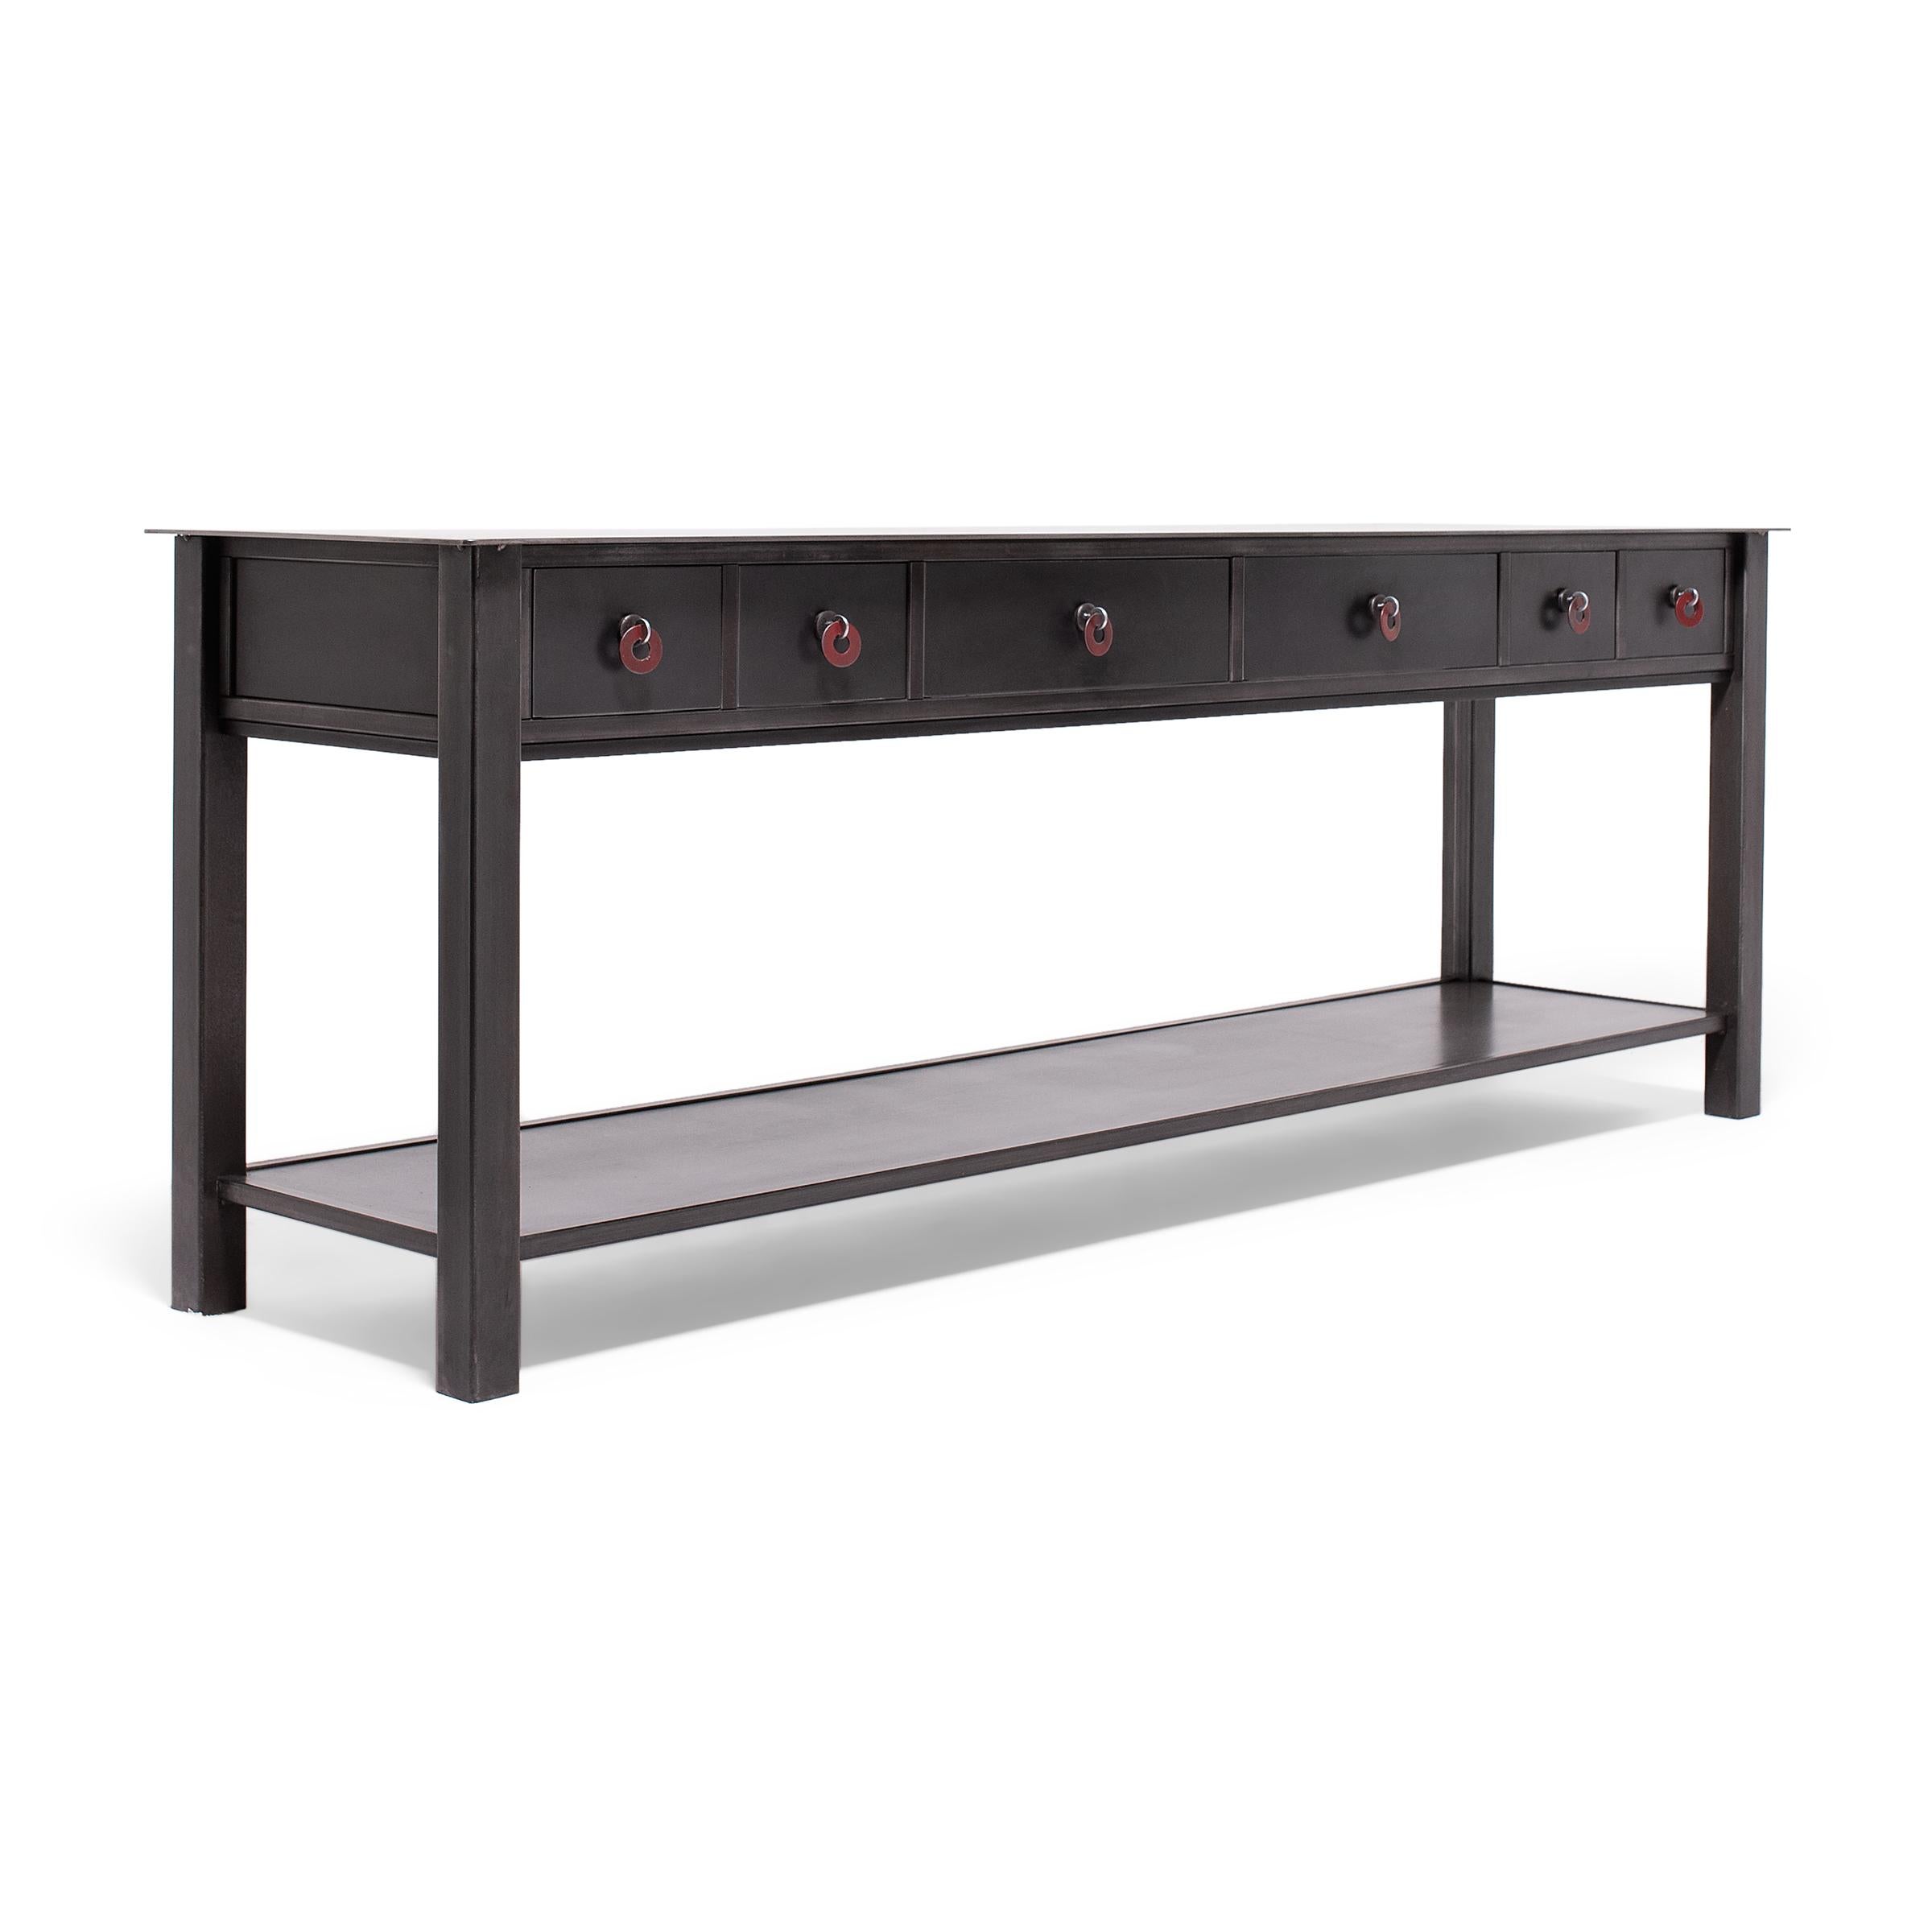 This steel console table by artist Jim Rose forges a connection between Shaker minimalism and the simplified lines and austere aesthetic of Ming-dynasty furniture. The culmination of years of studying the vernacular history of furniture design, his